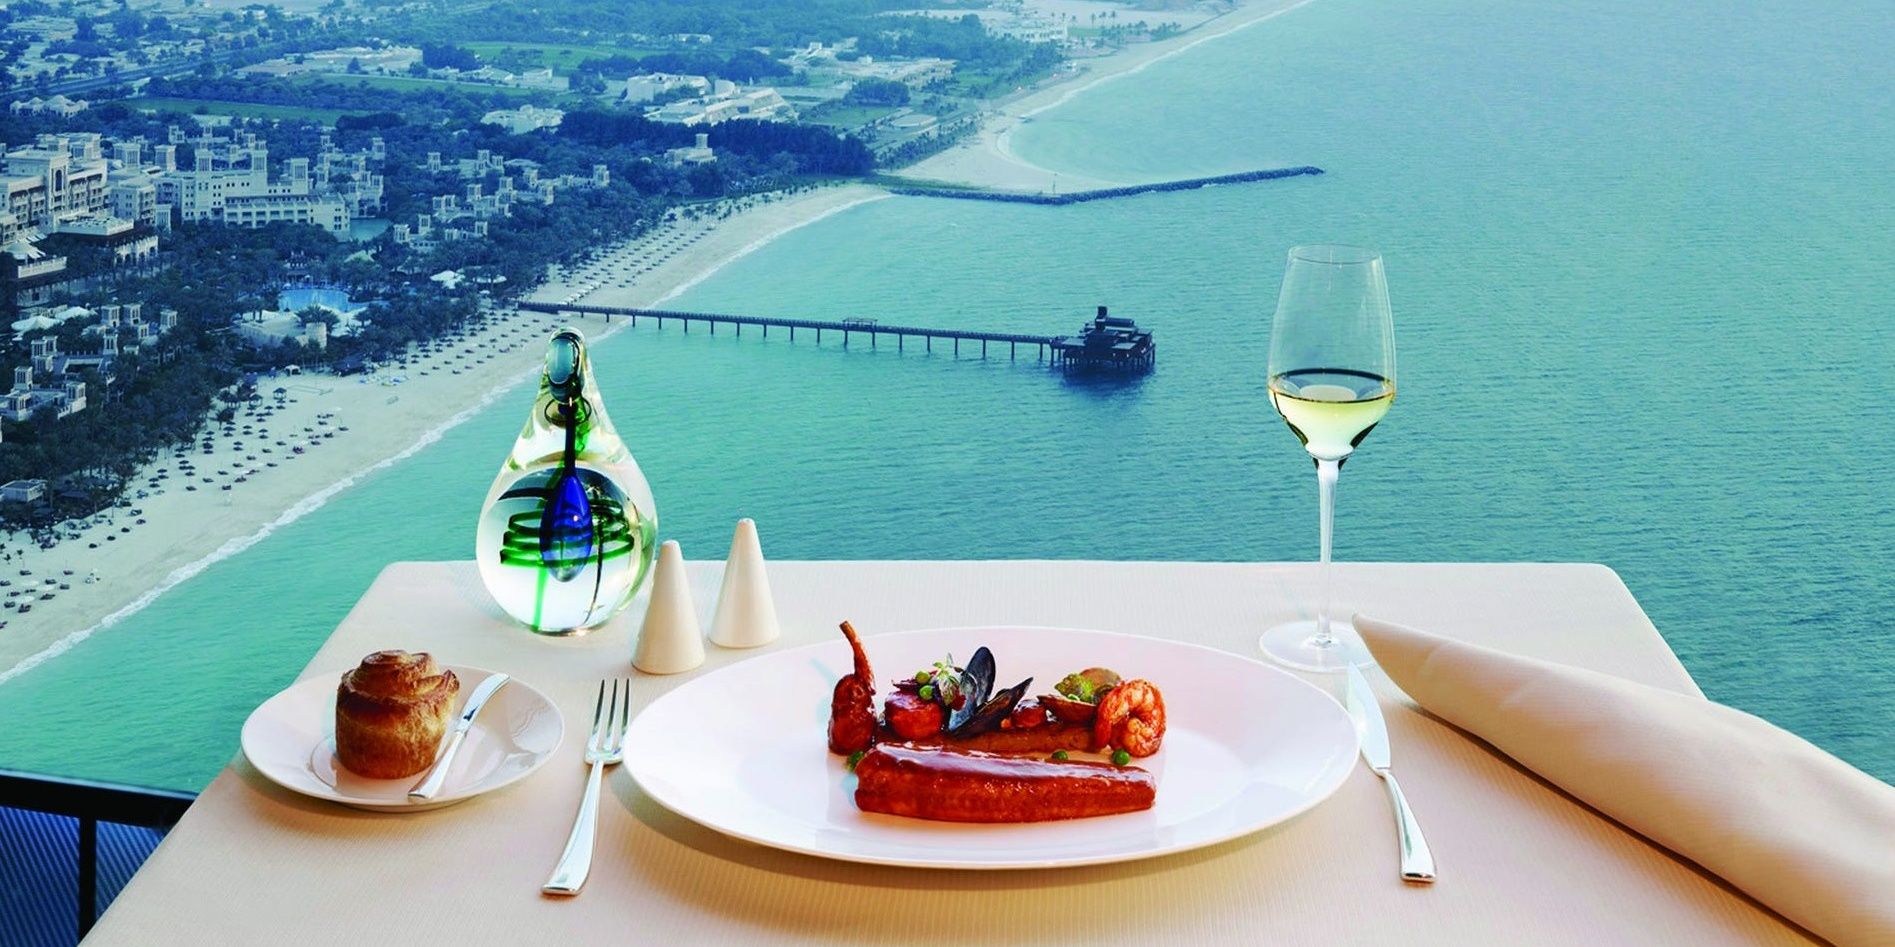 10 Most Expensive Restaurant Meals In Dubai | TheRichest